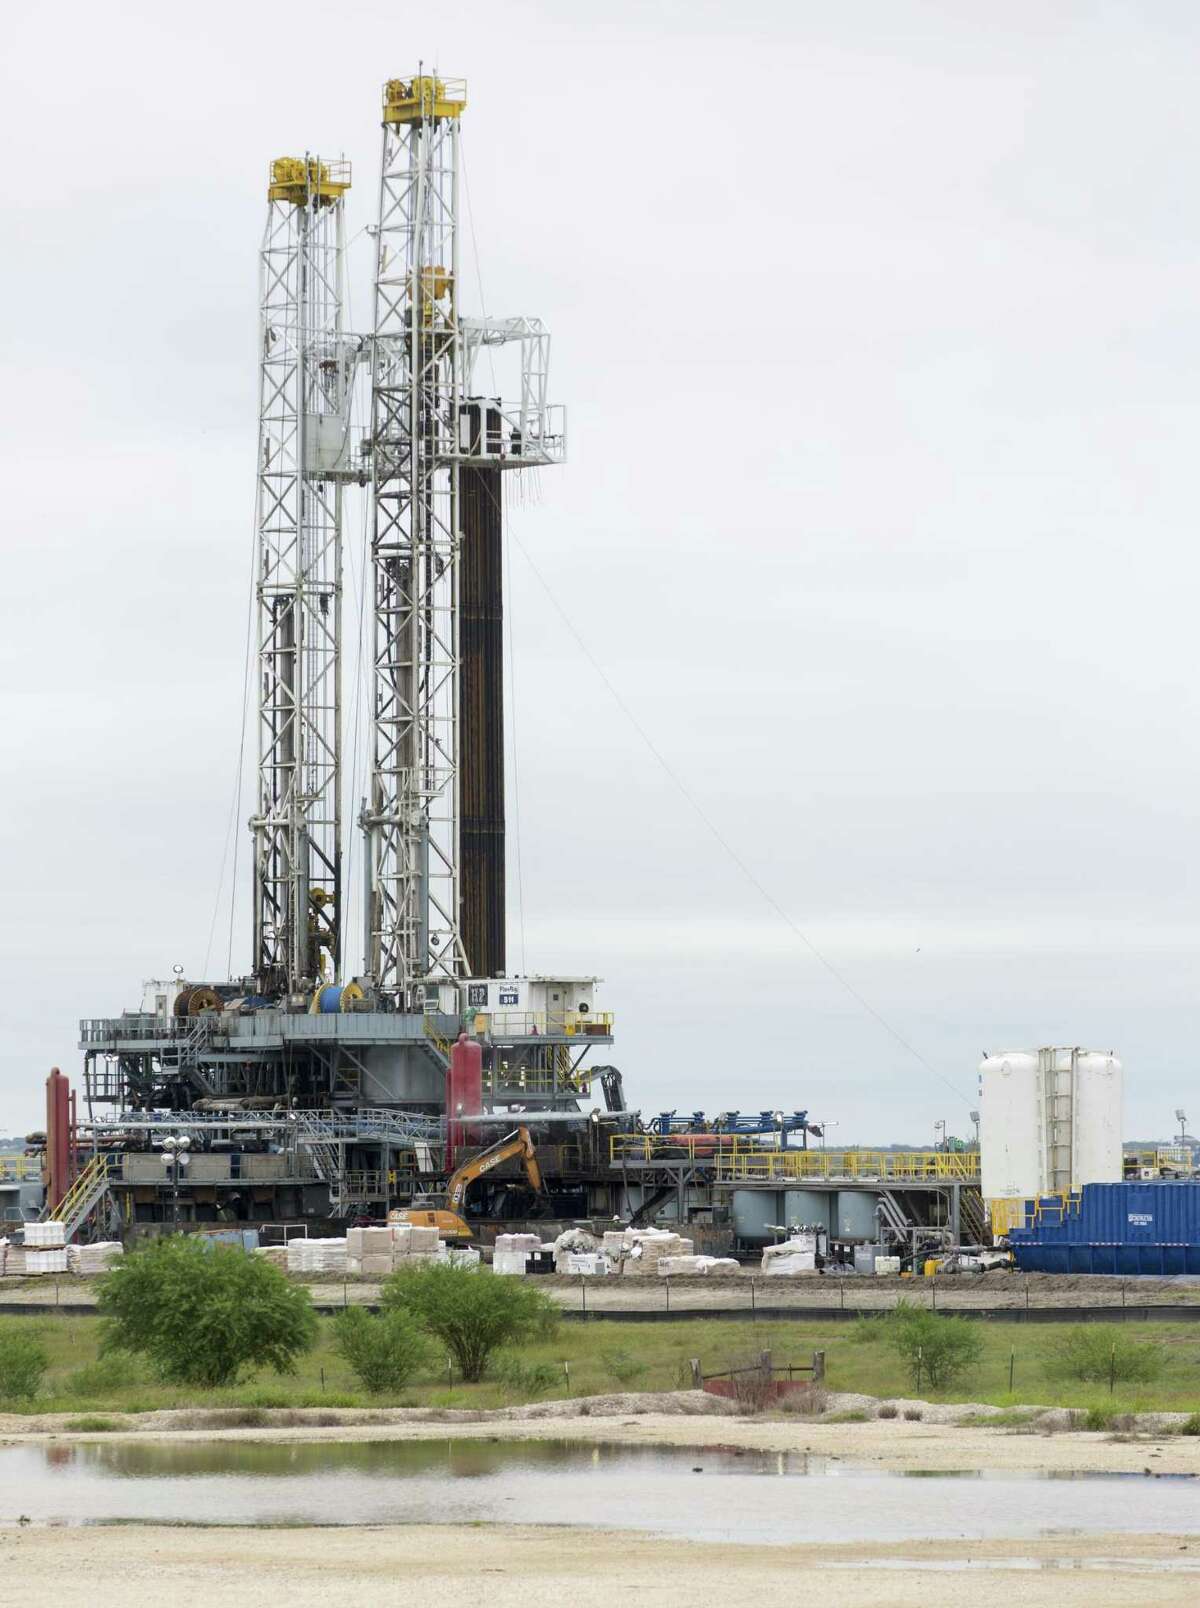 Drilling rigs in the Eagle Ford Shale in October. U.S. oil production has hit record levels and oil prices have plummeted, with global markets concerned about overproduction.